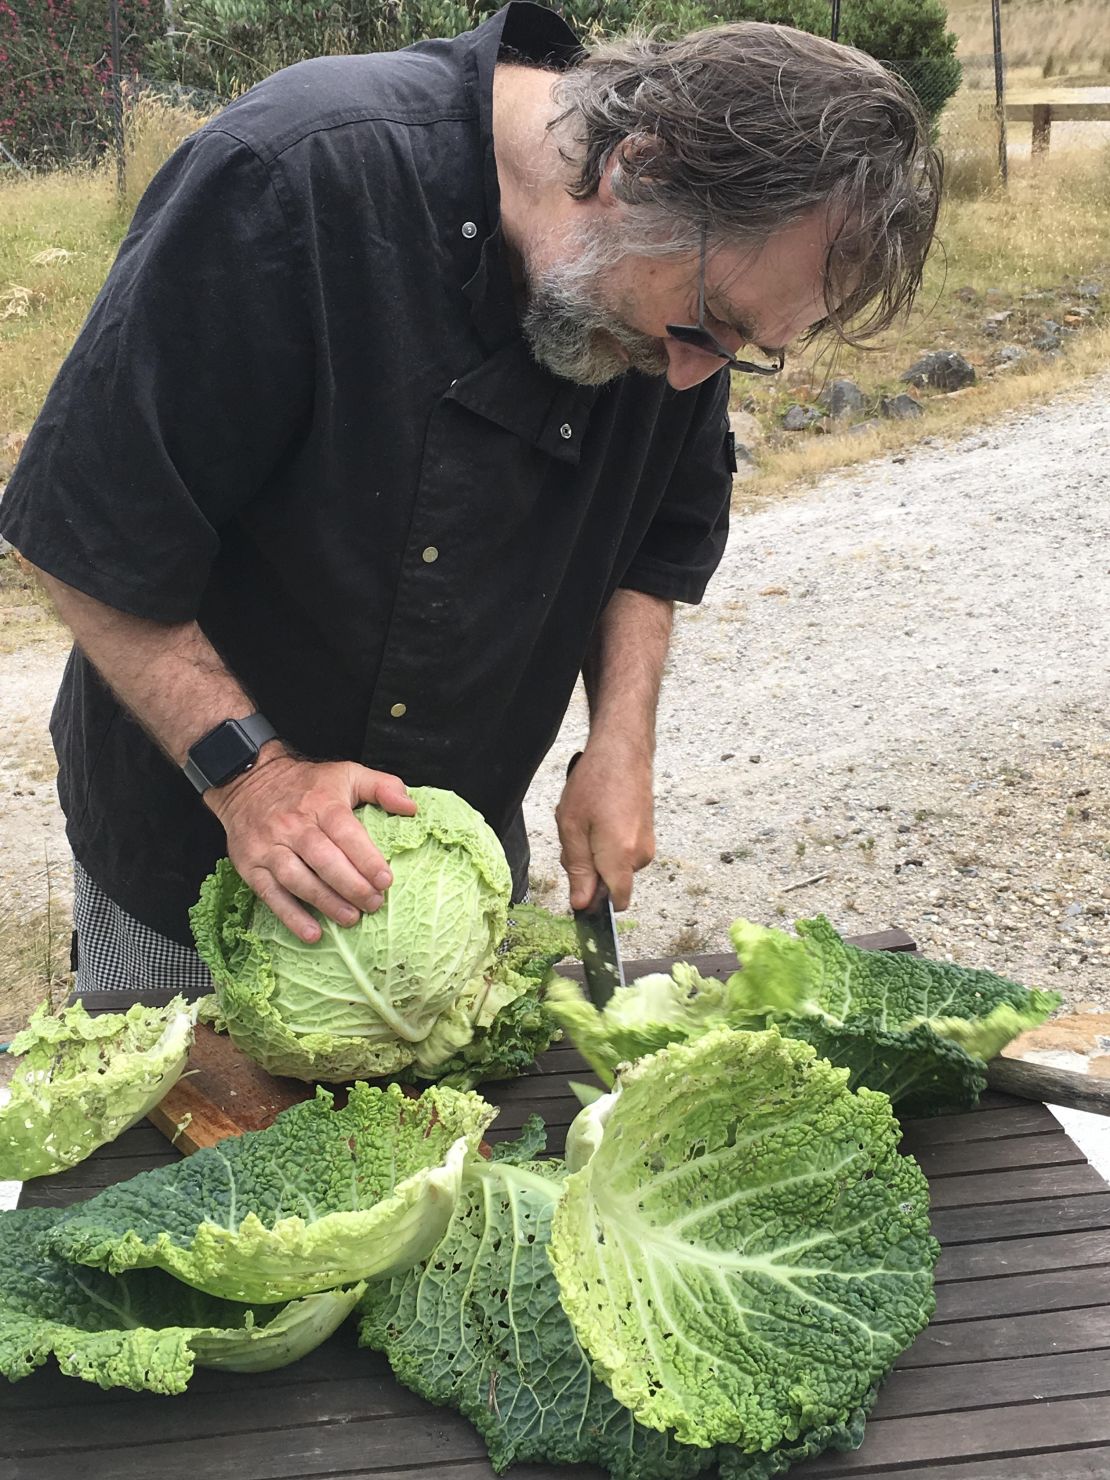 Forest Walks Lodge owner Sean Cadman breaks up the giant cabbage to use in meals.